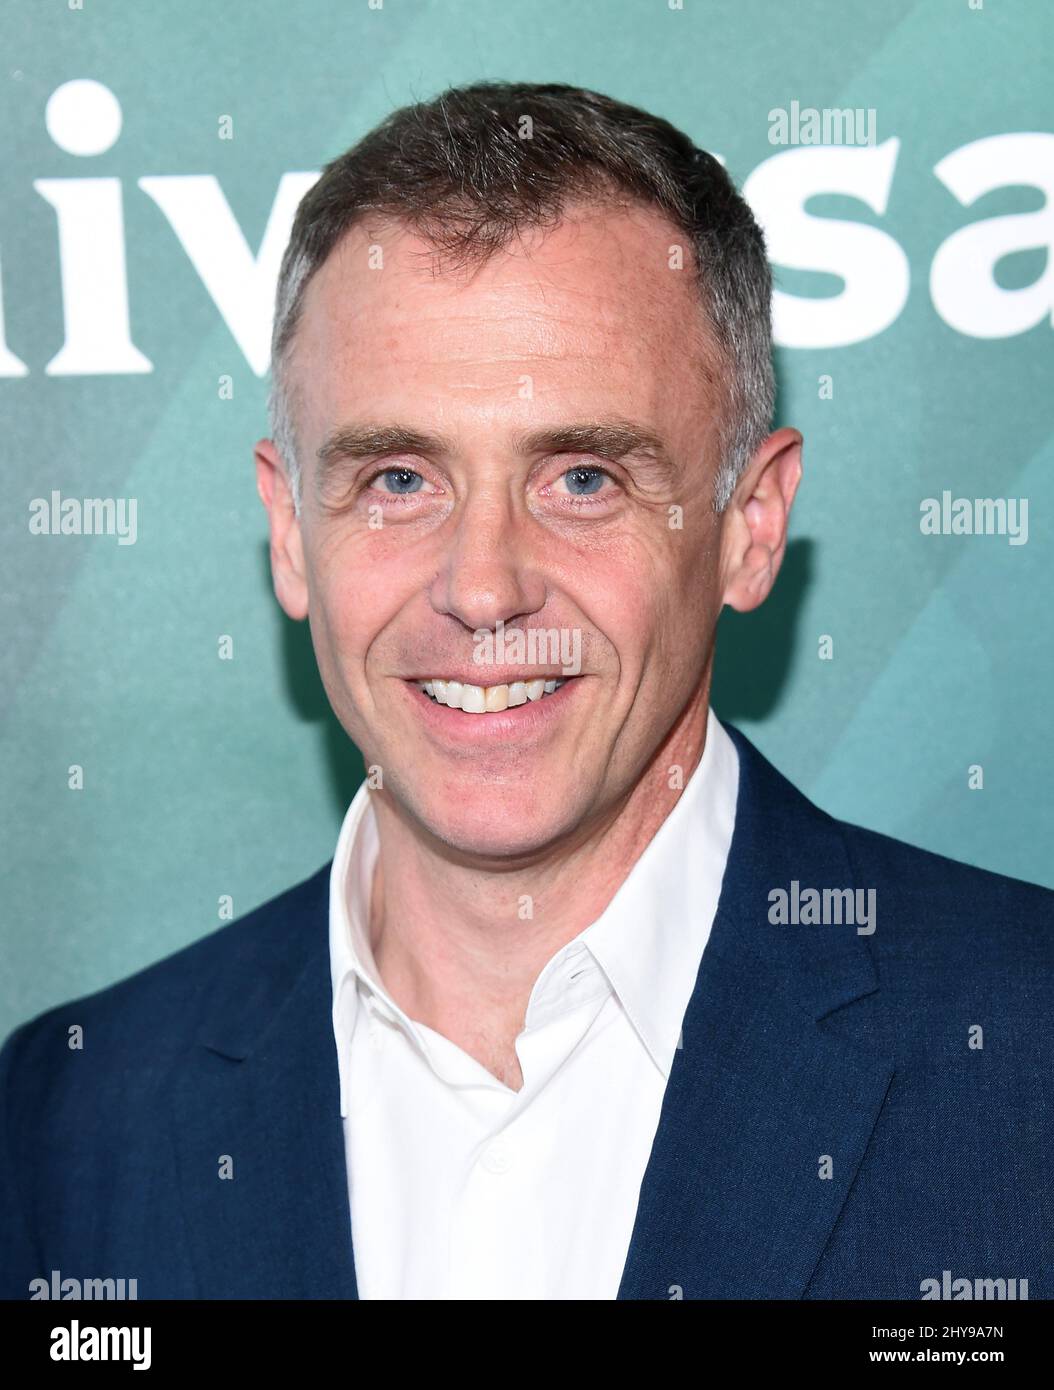 David Eigenberg arriving for NBC Universal's Summer Press Day 2016 held at the Four Seasons Hotel & Resort, Los Angeles, April 1st 2016. Stock Photo